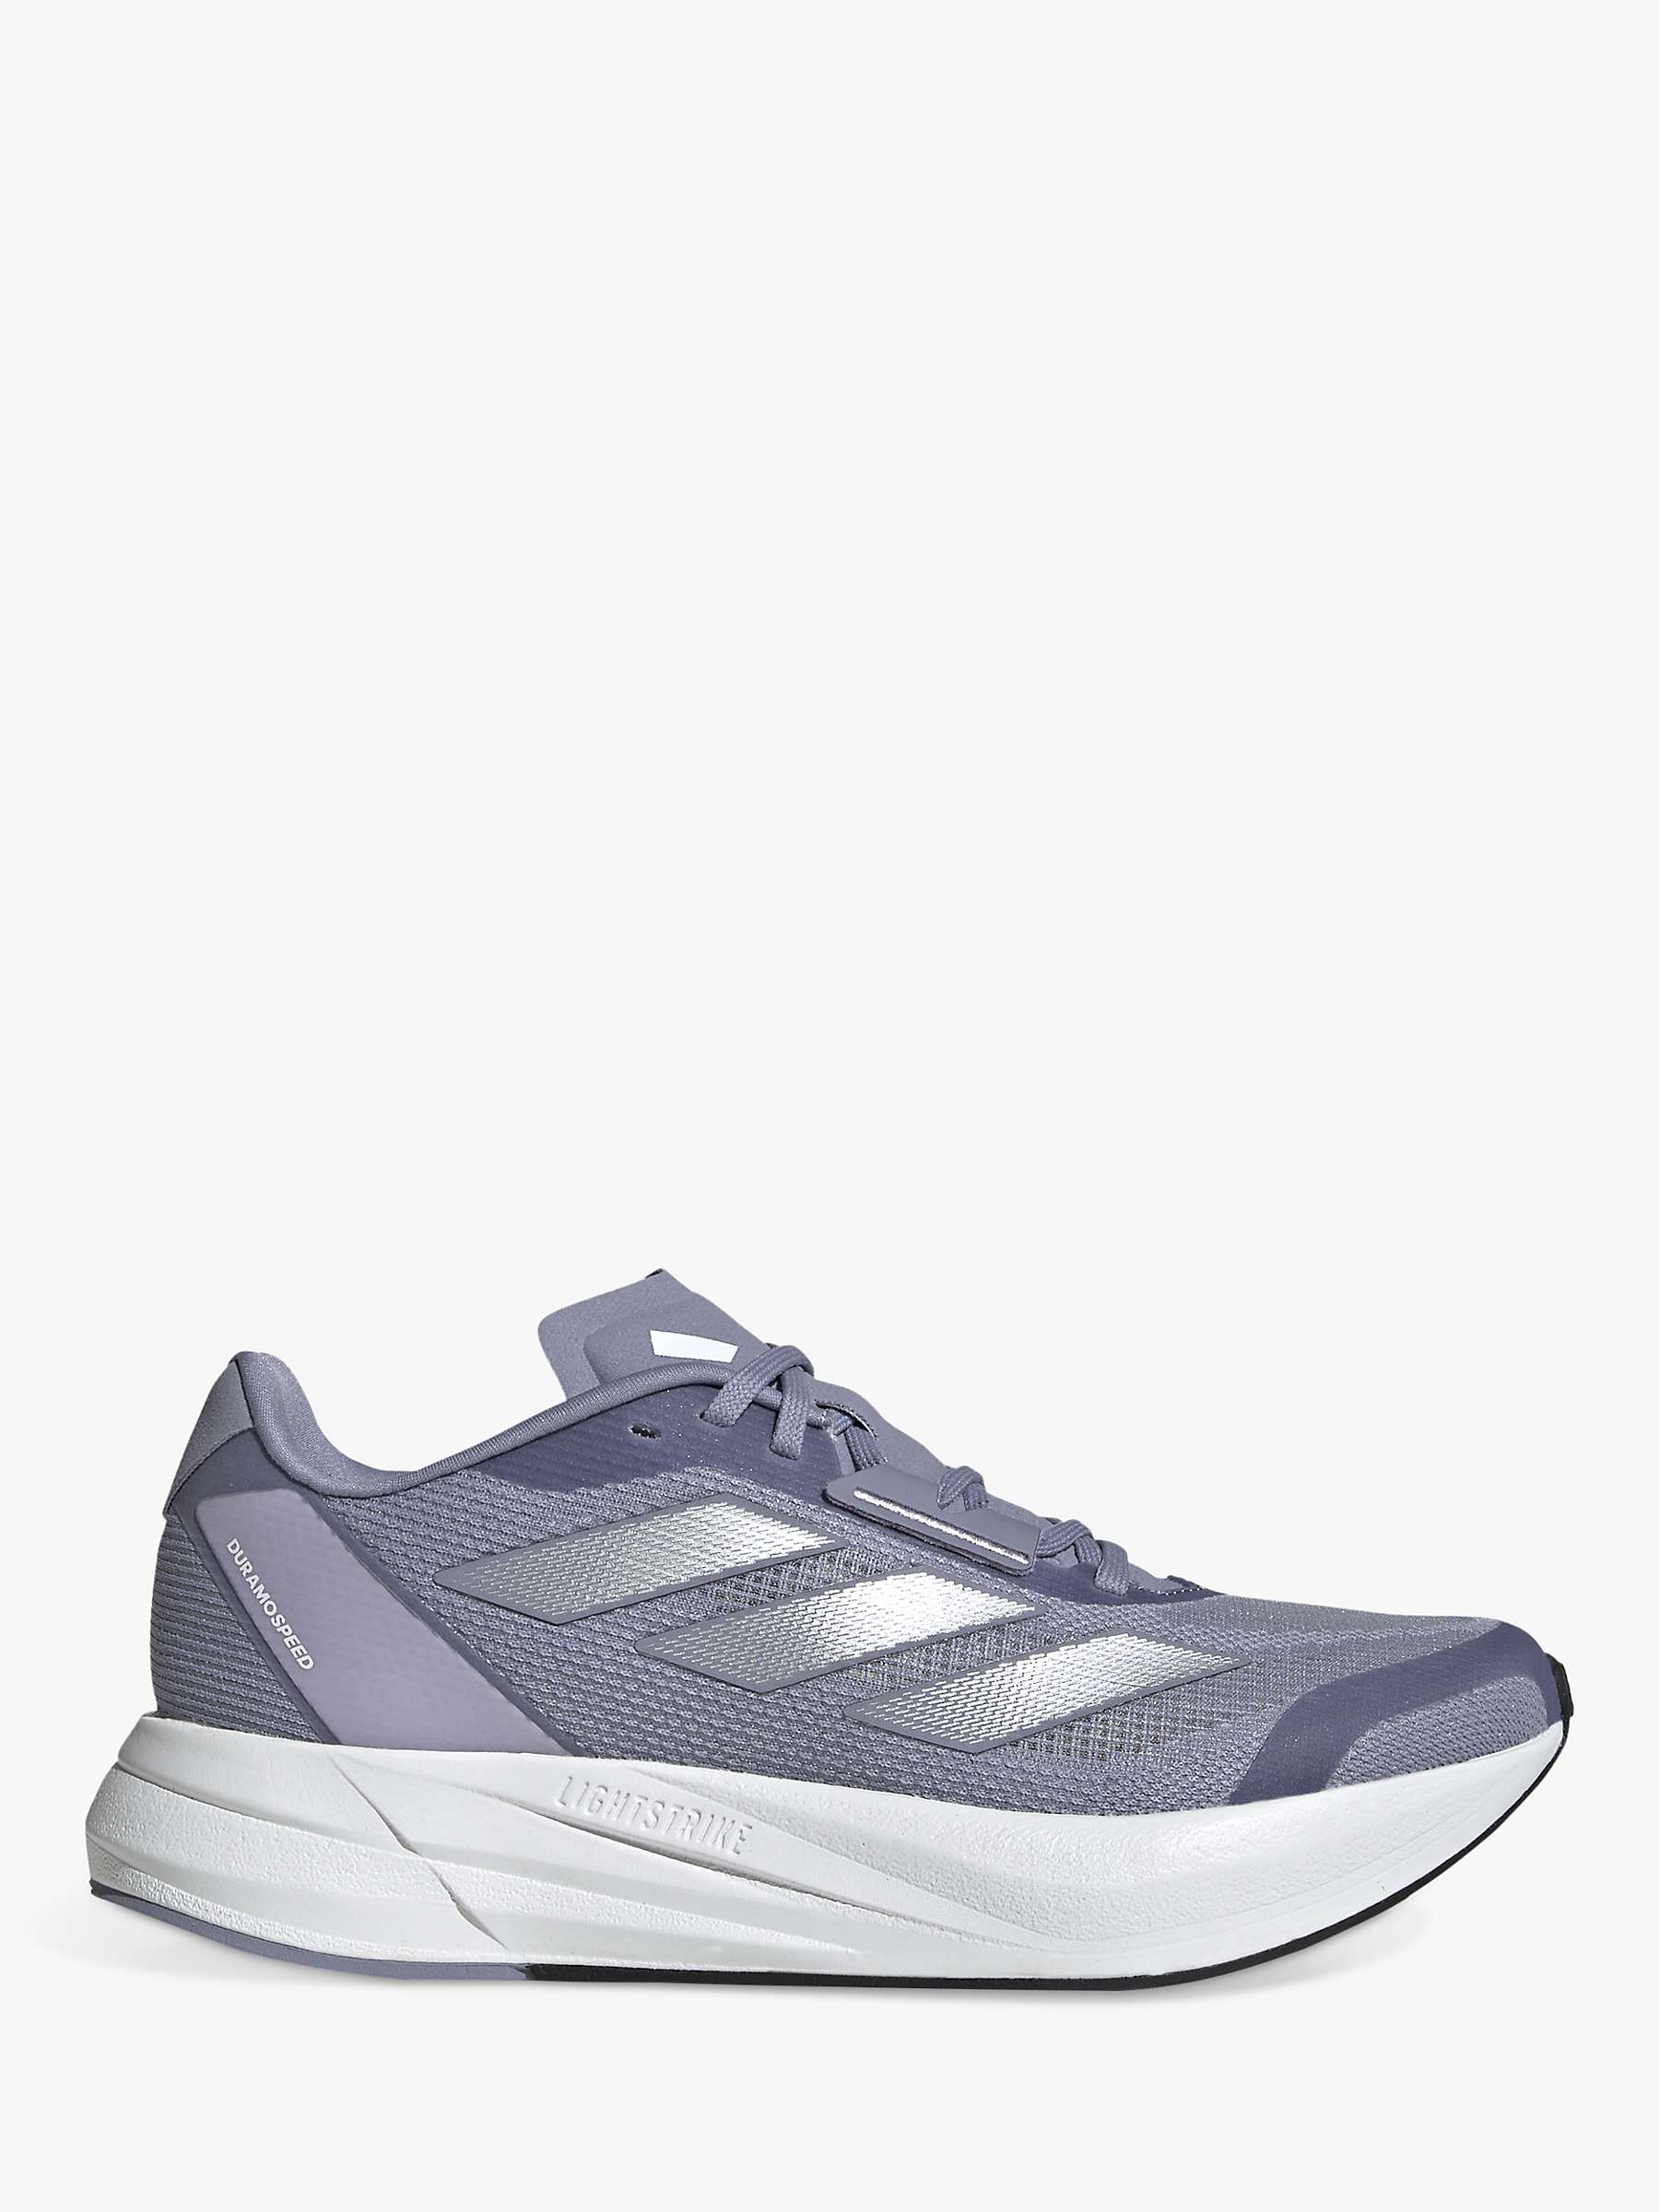 Buy adidas Duramo Speed Trainers, Silver/Silver Dawn Online at johnlewis.com